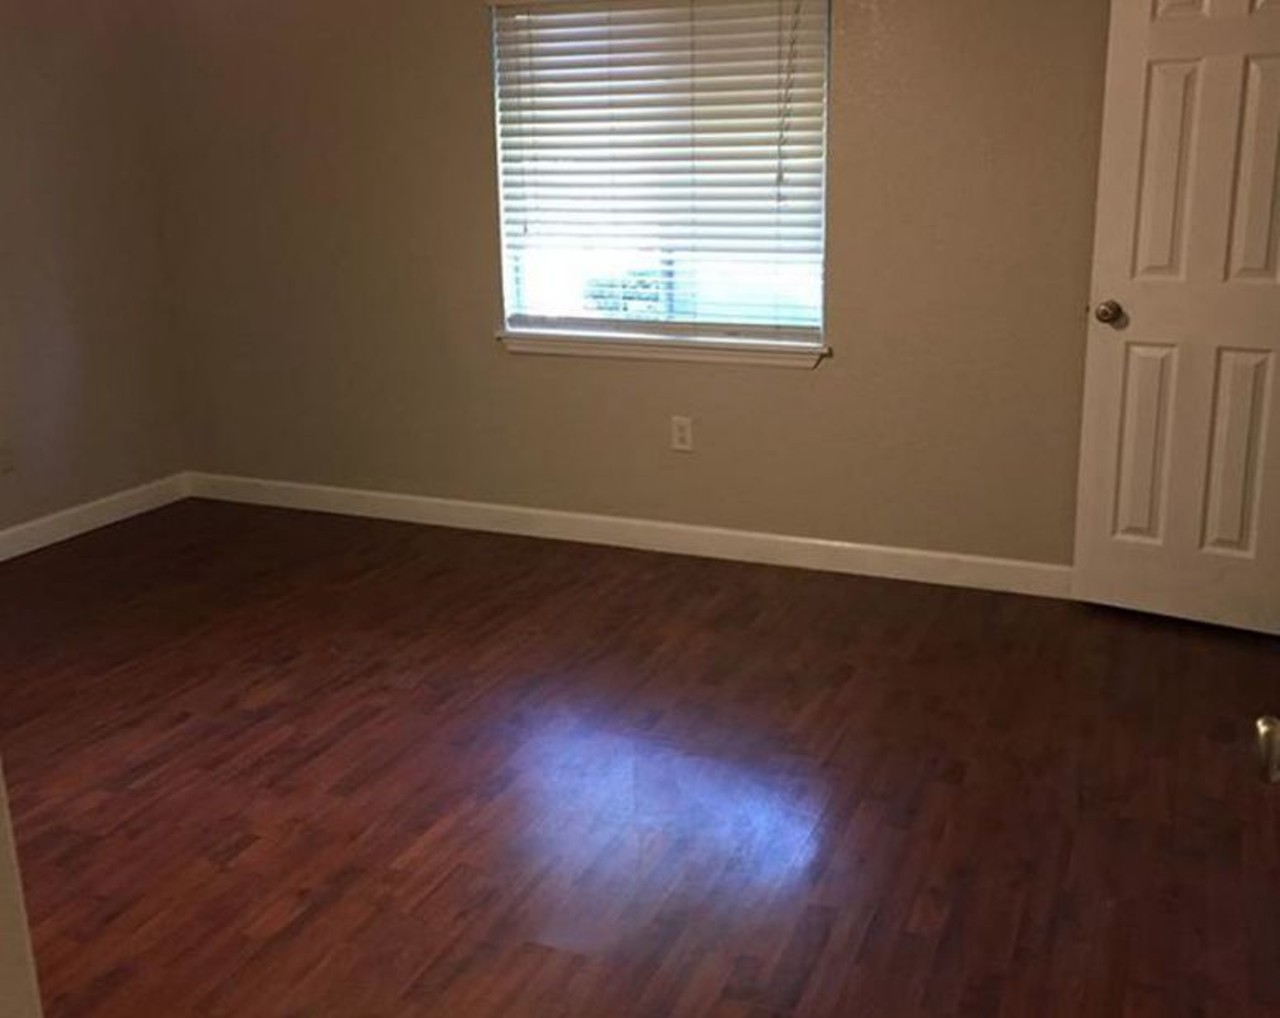 1940 Conway Rd, Orlando
$1,200/mo
2 bed, 2 bath, 1,100 sqft
These bedrooms are large and have the same hardwood floor that goes throughout the apartment as well.